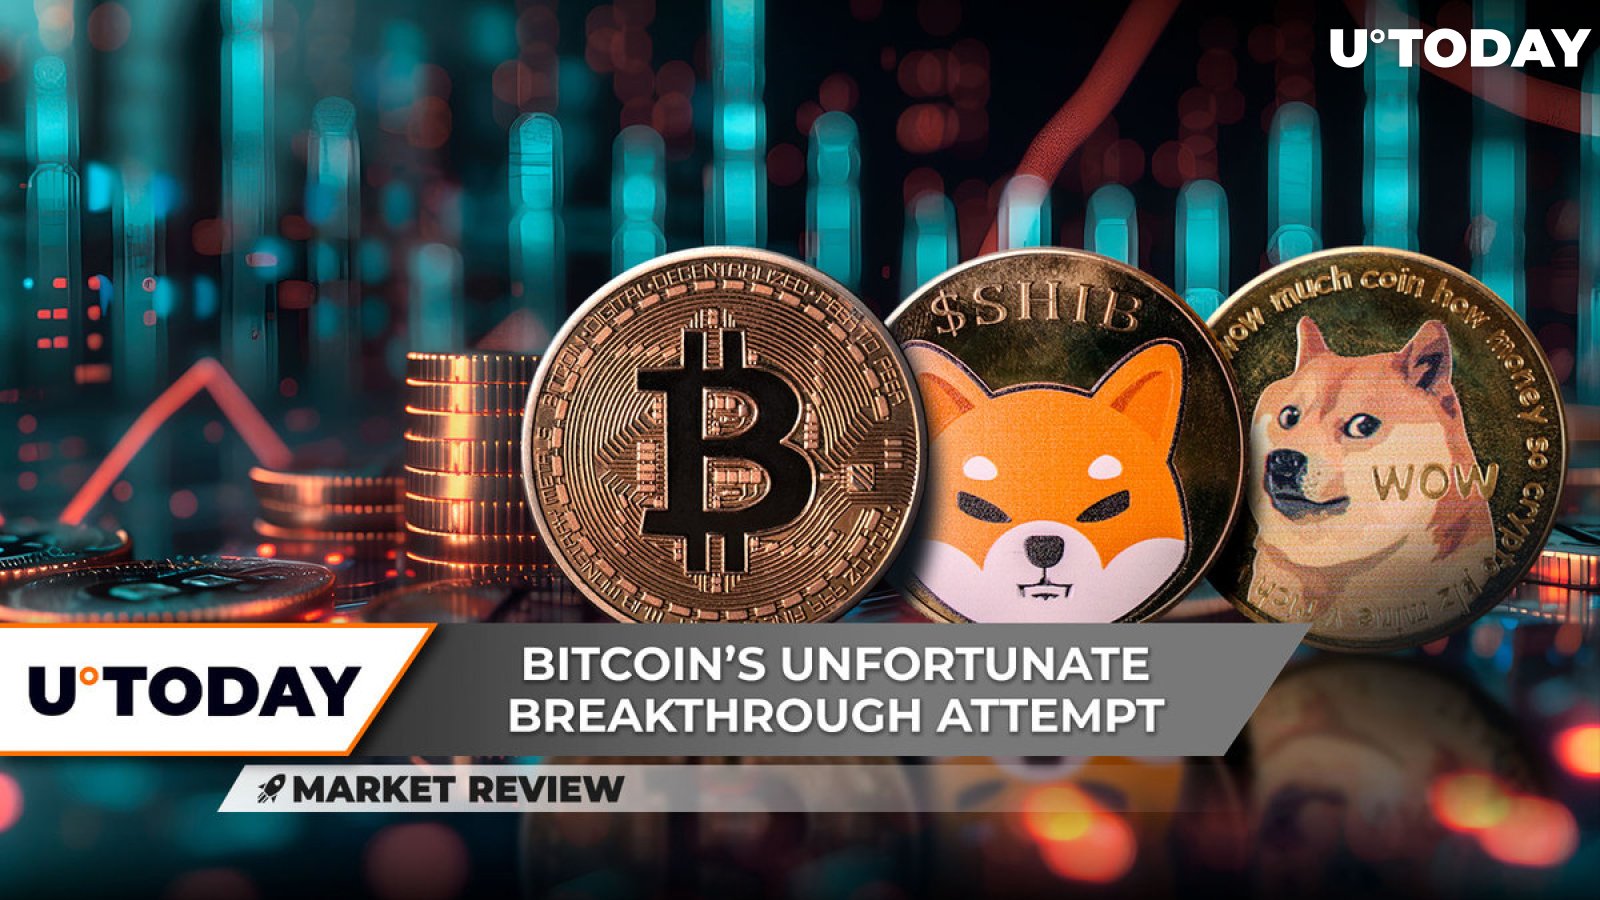 $70,000 Breakthrough Eludes Bitcoin, What's Next? Shiba Inu (SHIB) Escapes Downtrend, But Will Dogecoin (DOGE) Breakthrough?